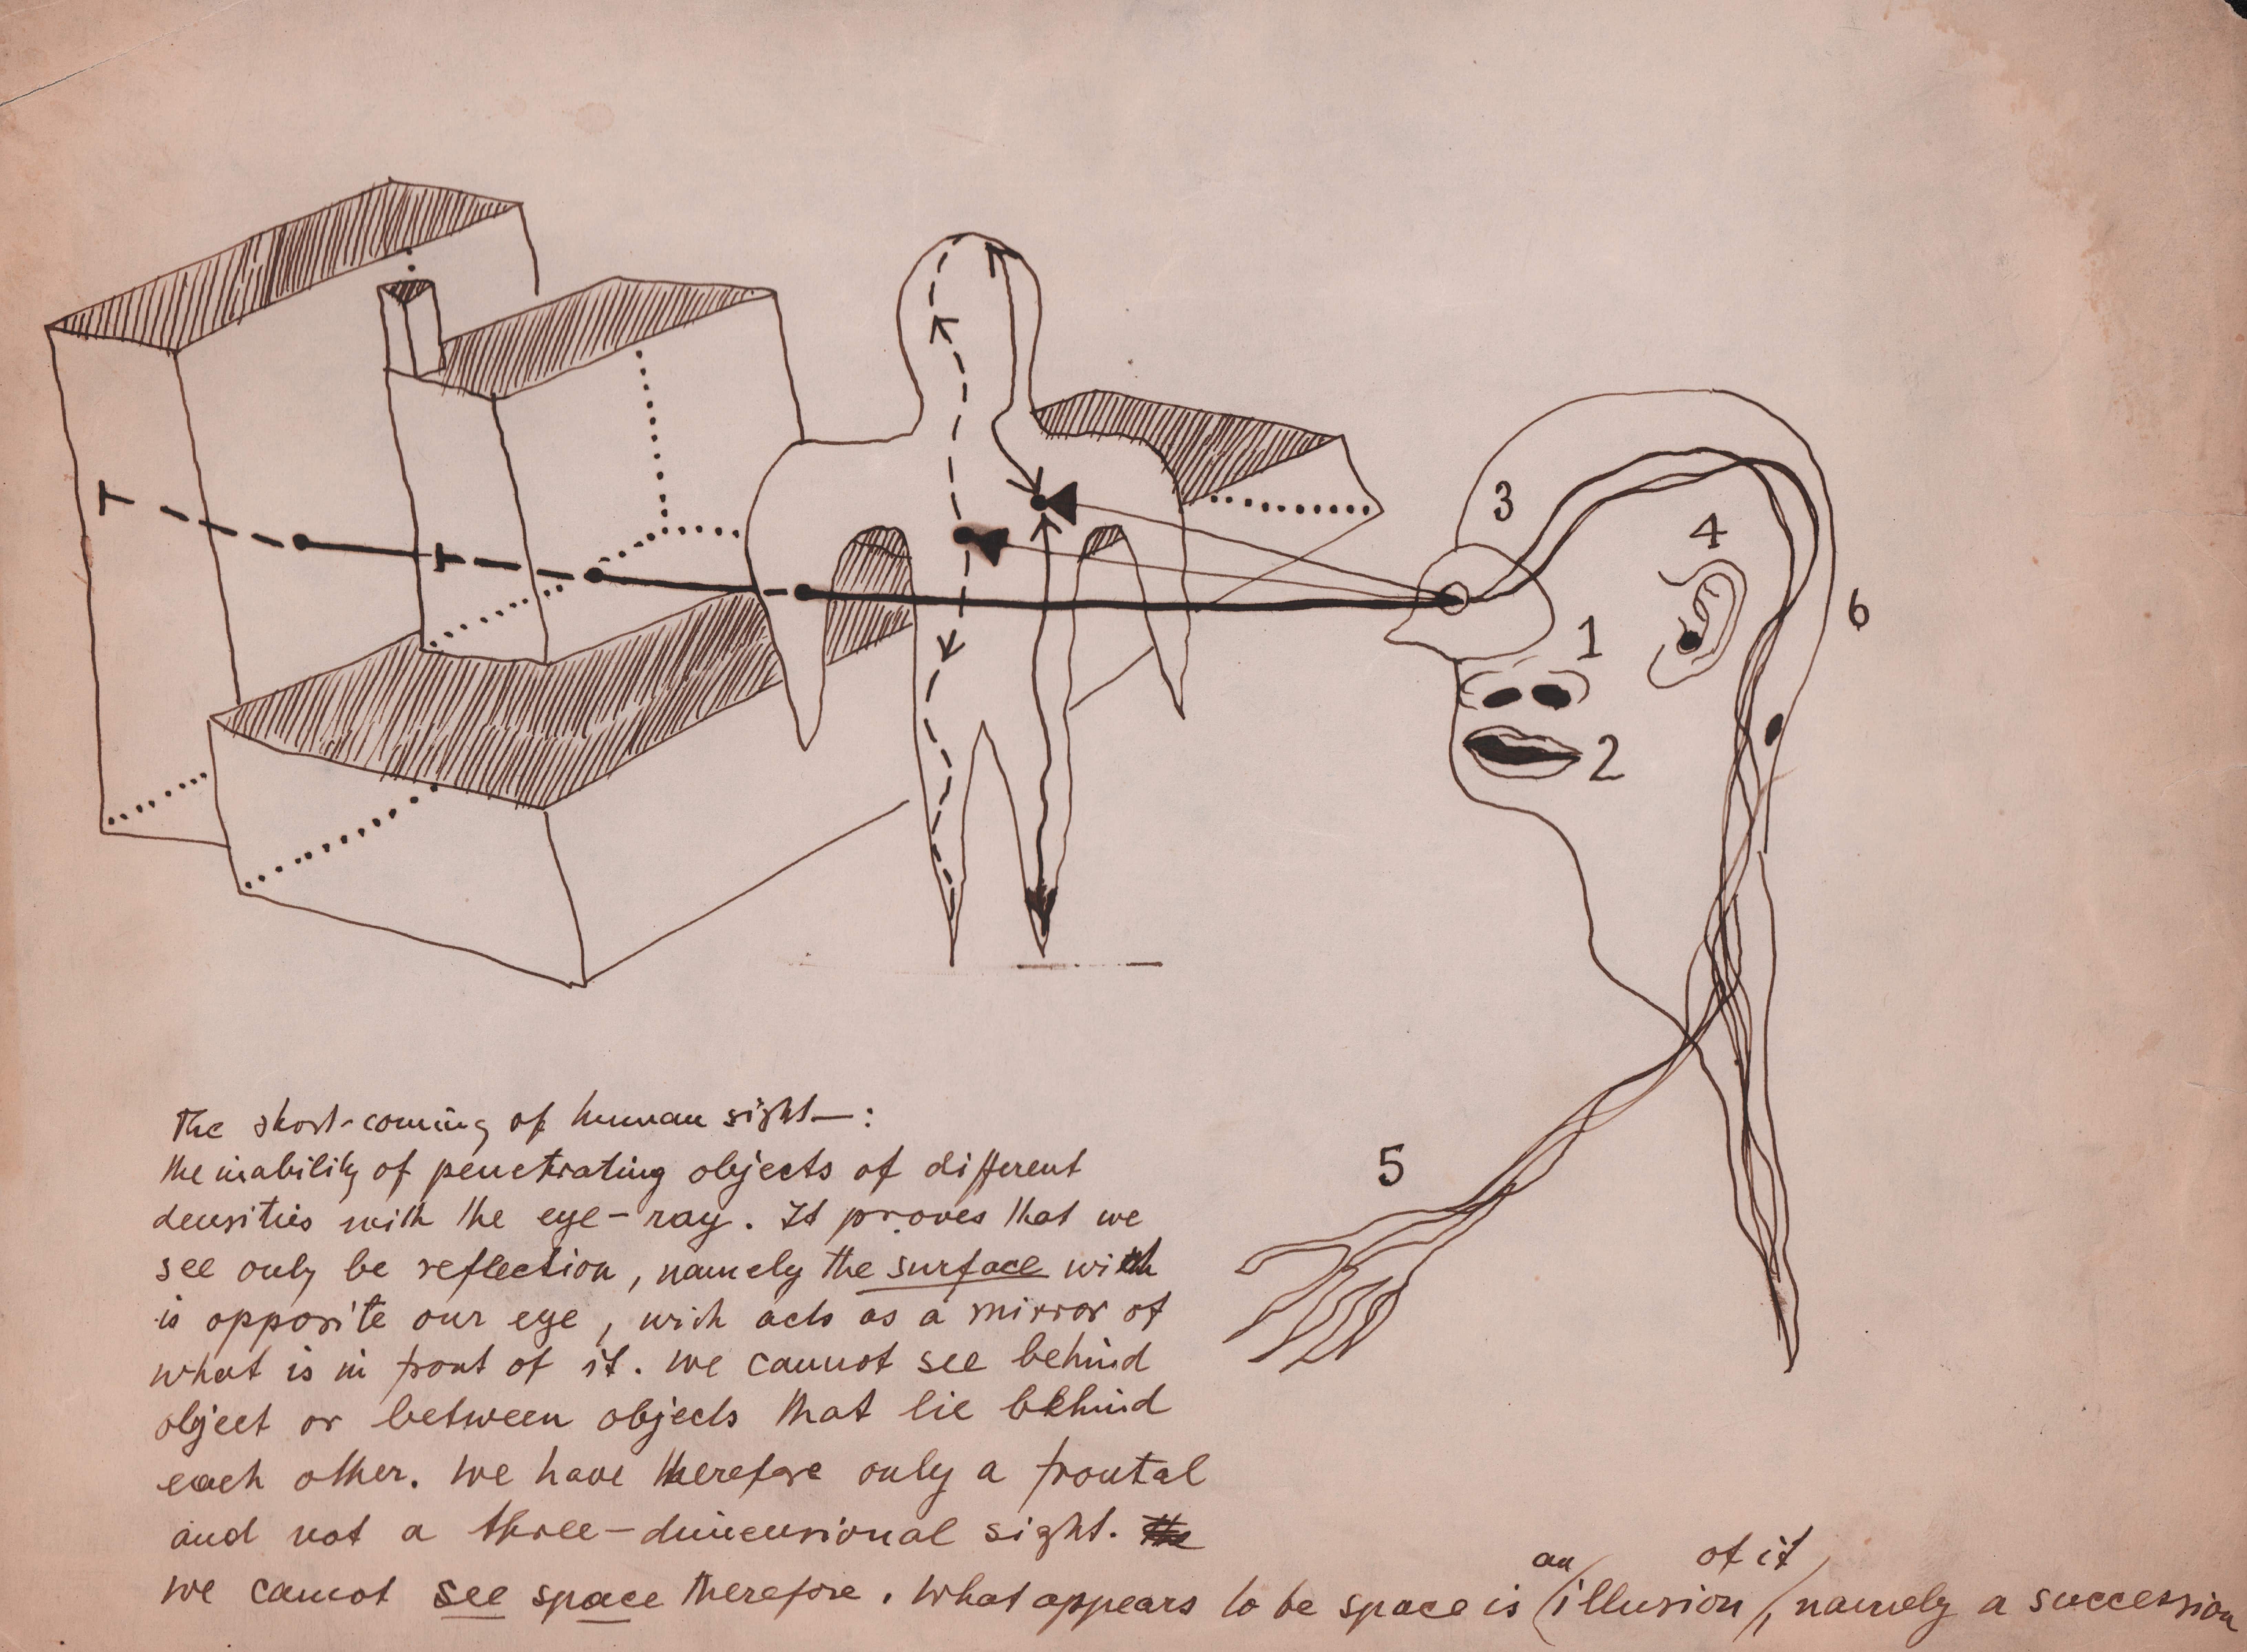 Frederick Kiesler, Study for Vision Machine (The shortcomings of human sight), part 1 of 2, 1938